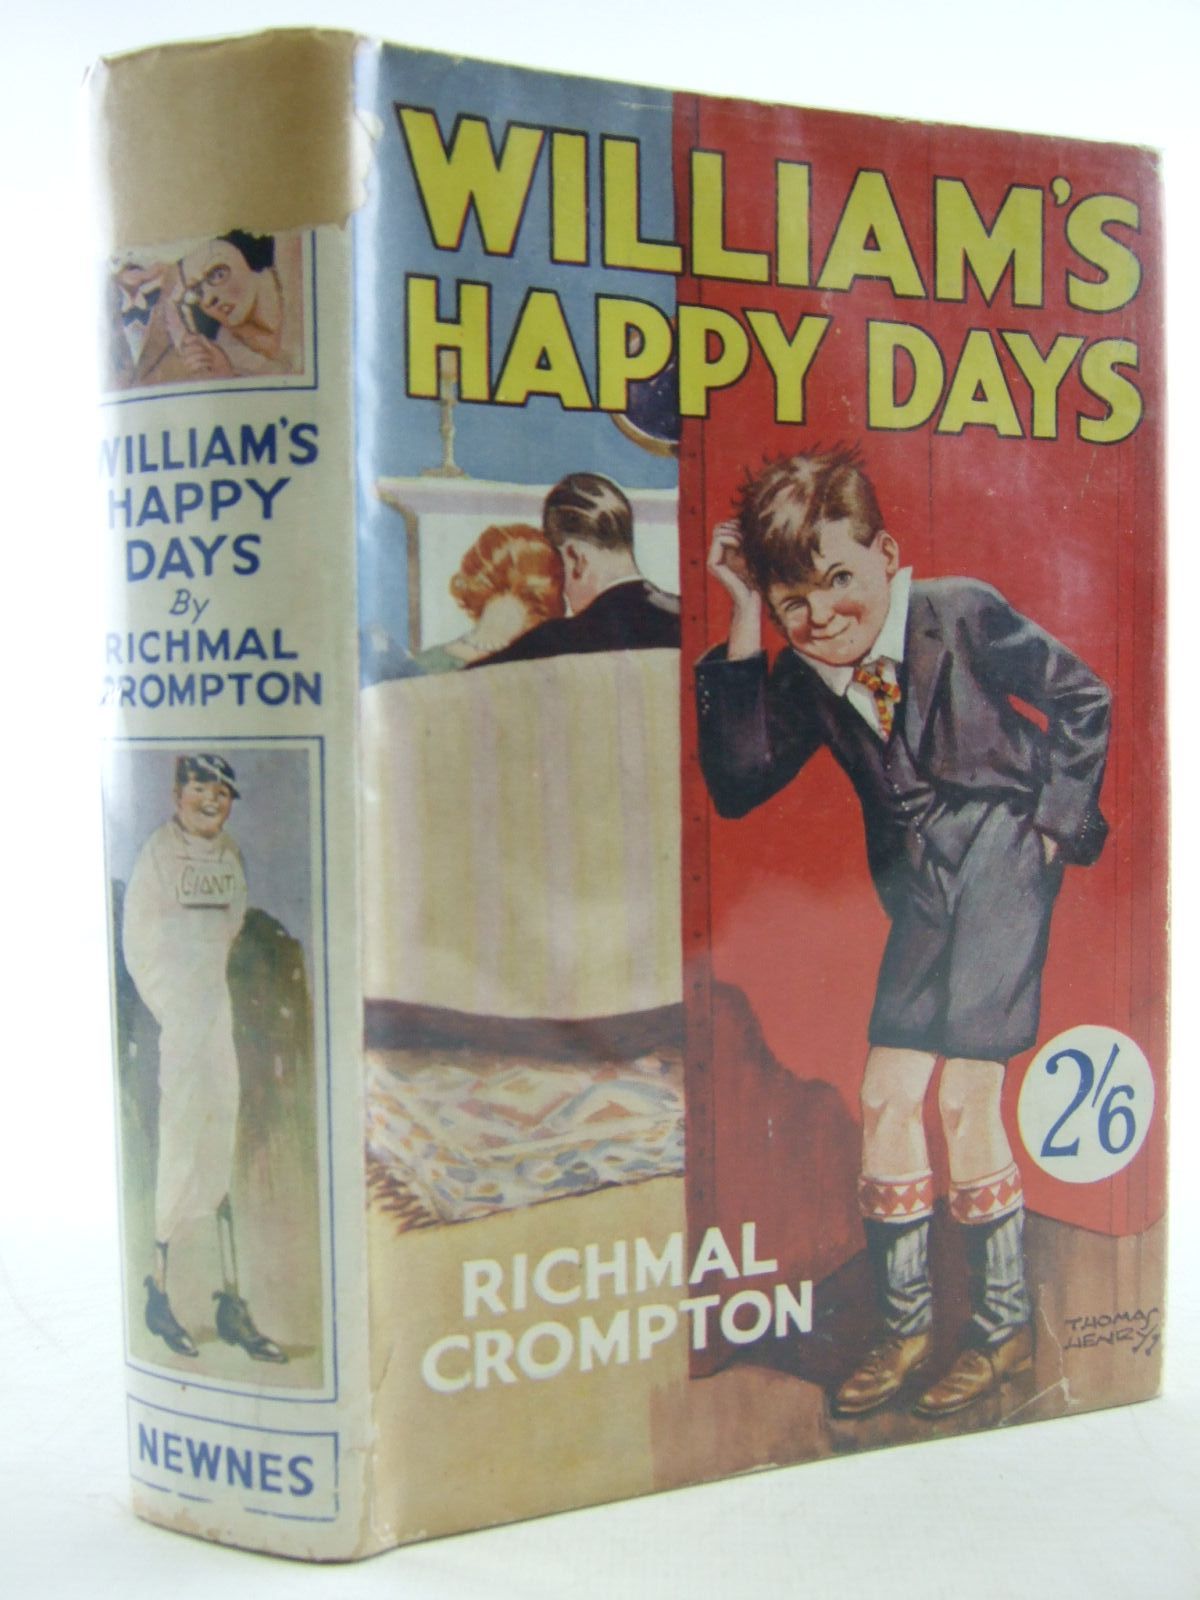 Cover of WILLIAM'S HAPPY DAYS by Richmal Crompton